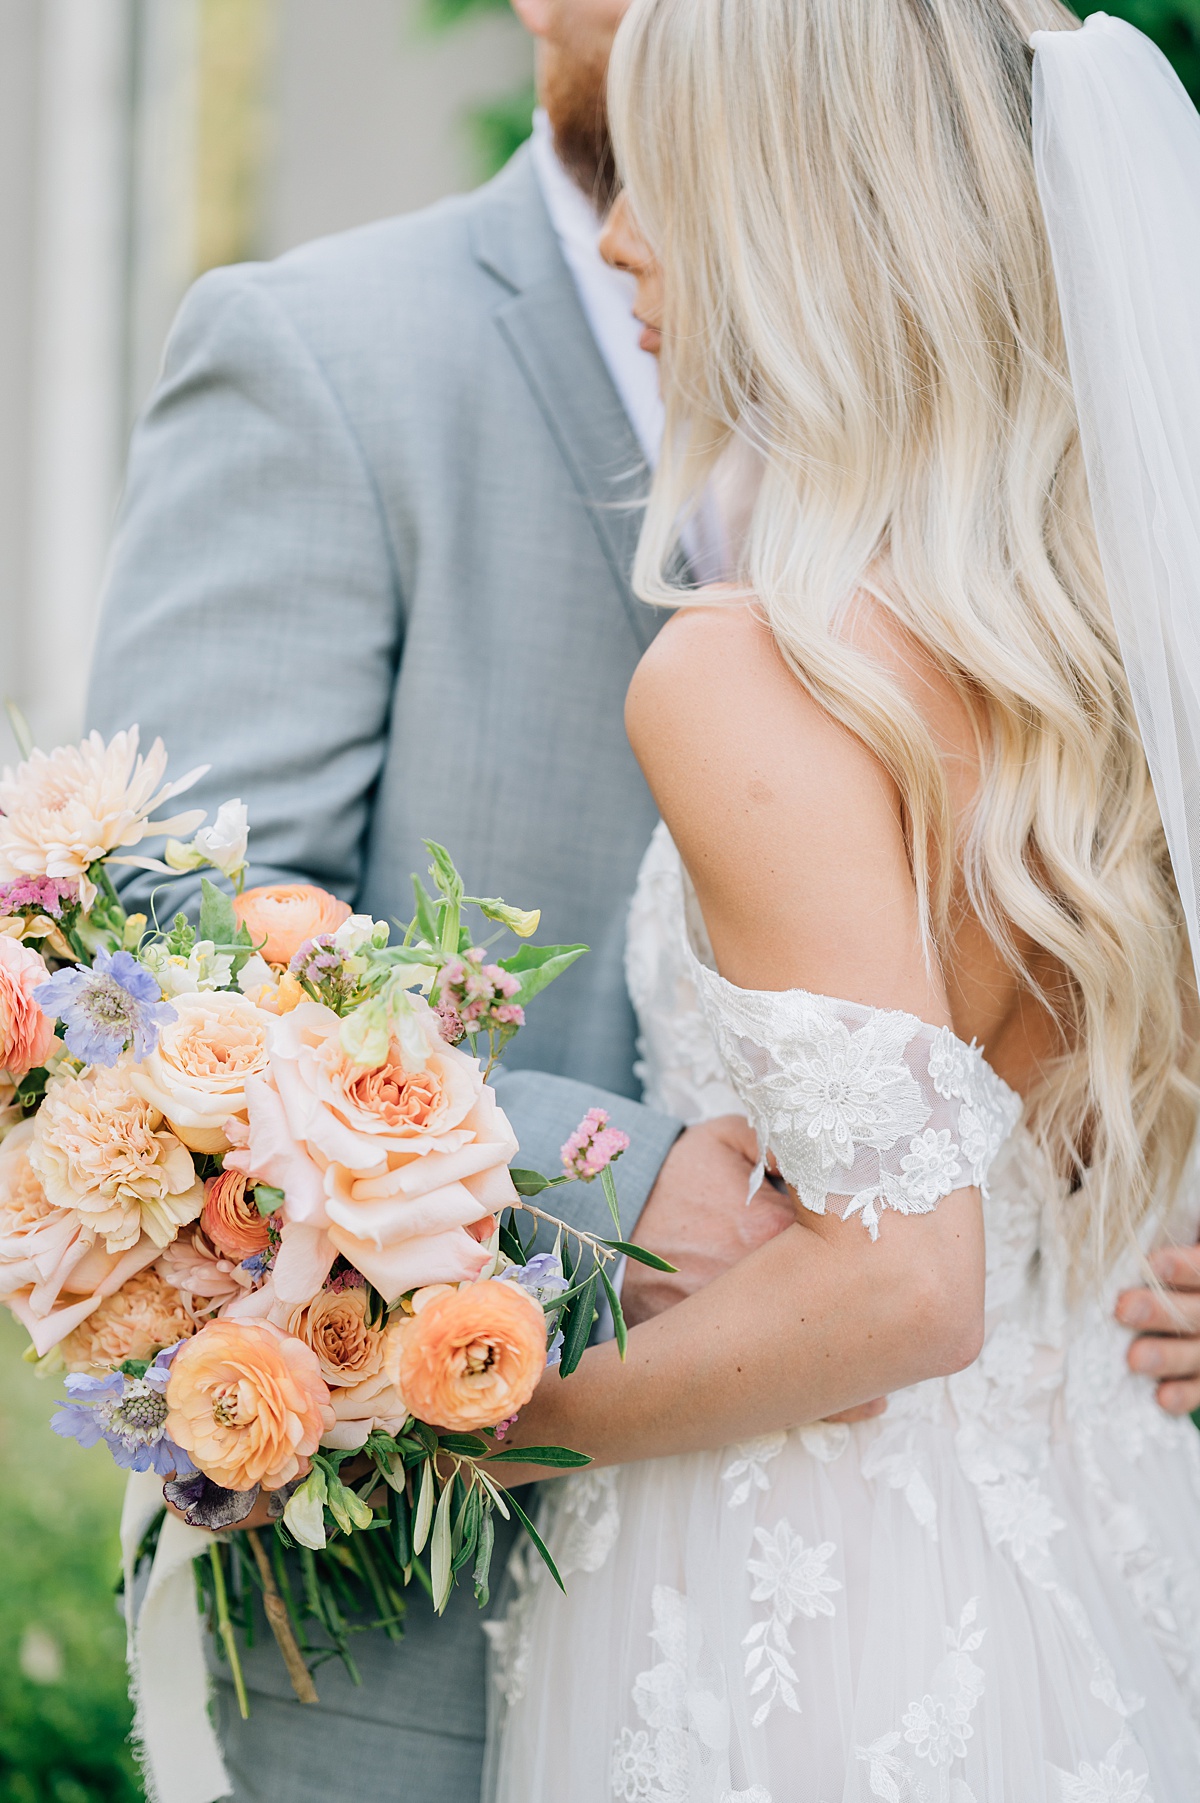 How to Plan a Styled Shoot | Wedding Details